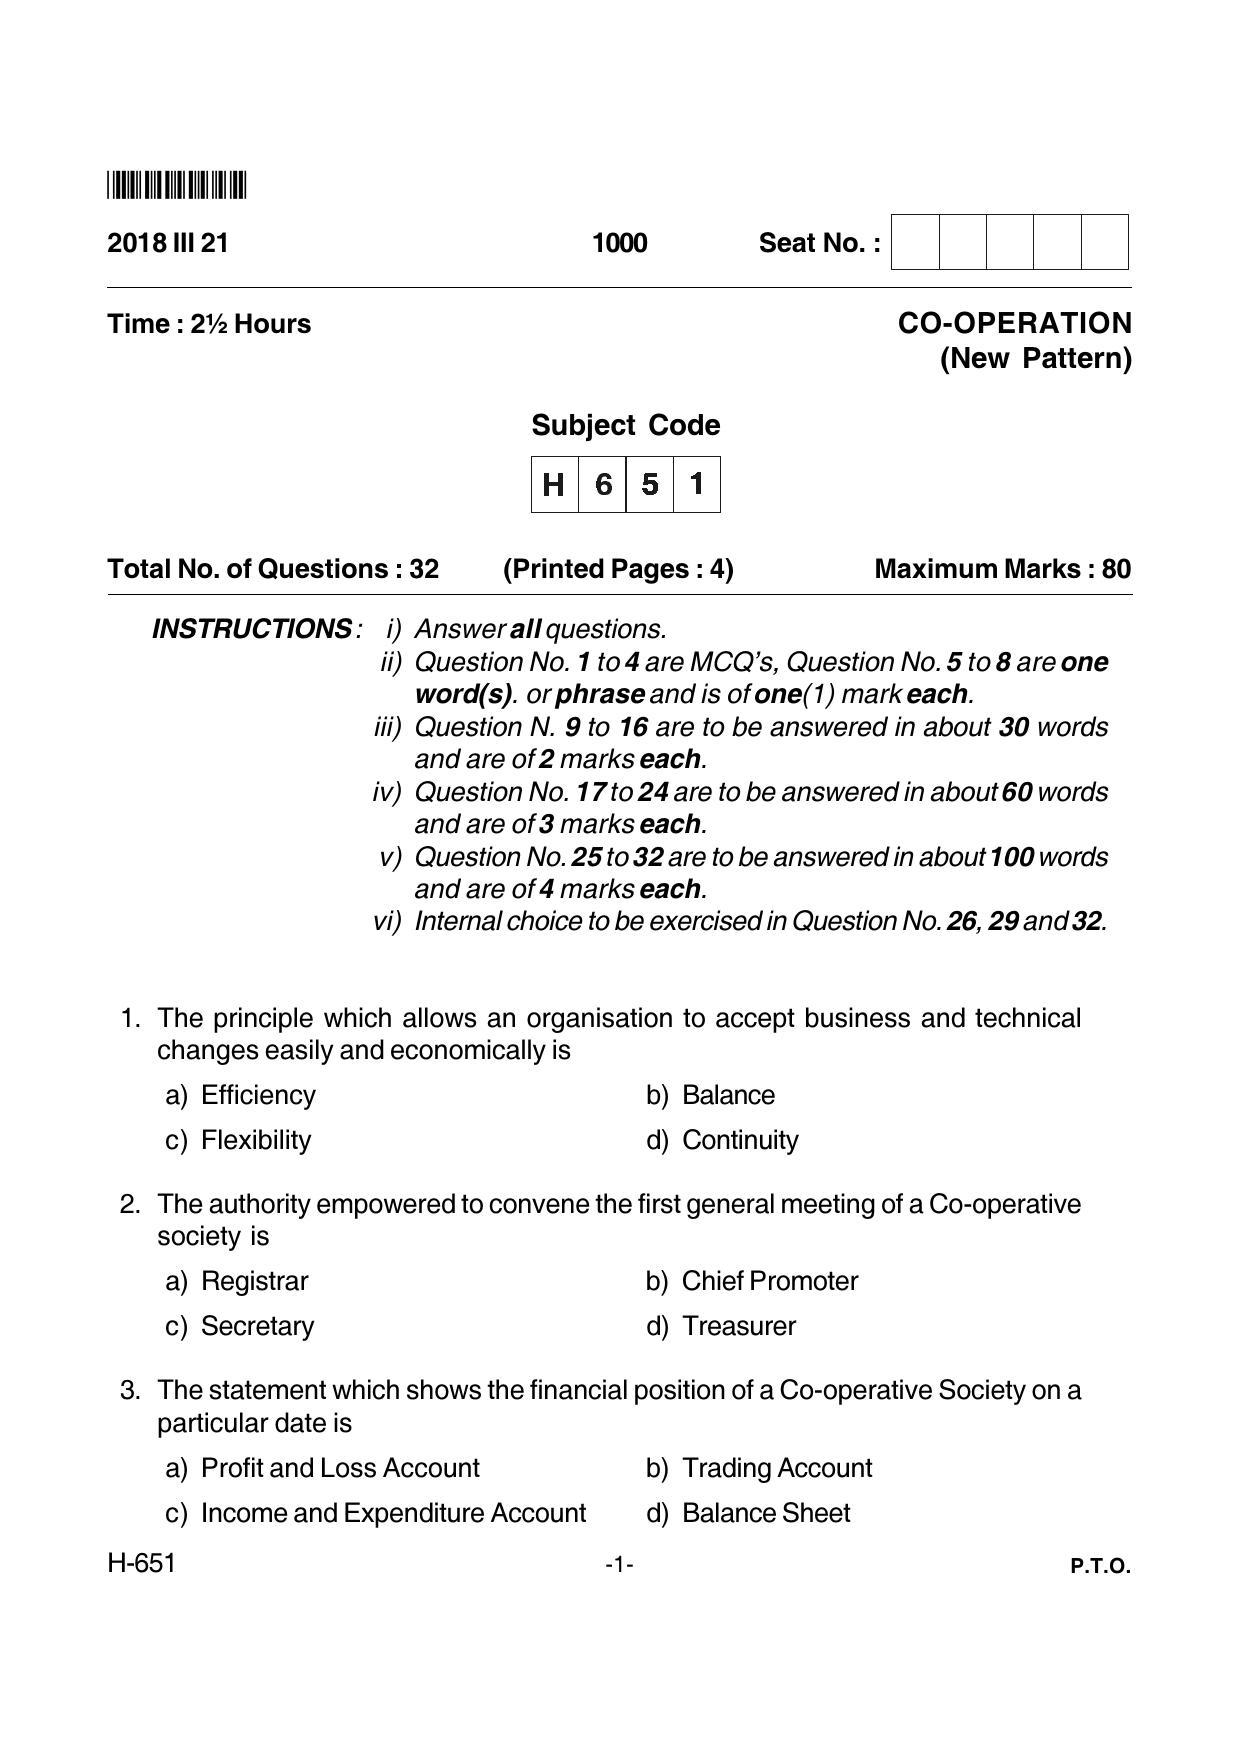 Goa Board Class 12 Co-operation  651 New Pattern (March 2018) Question Paper - Page 1